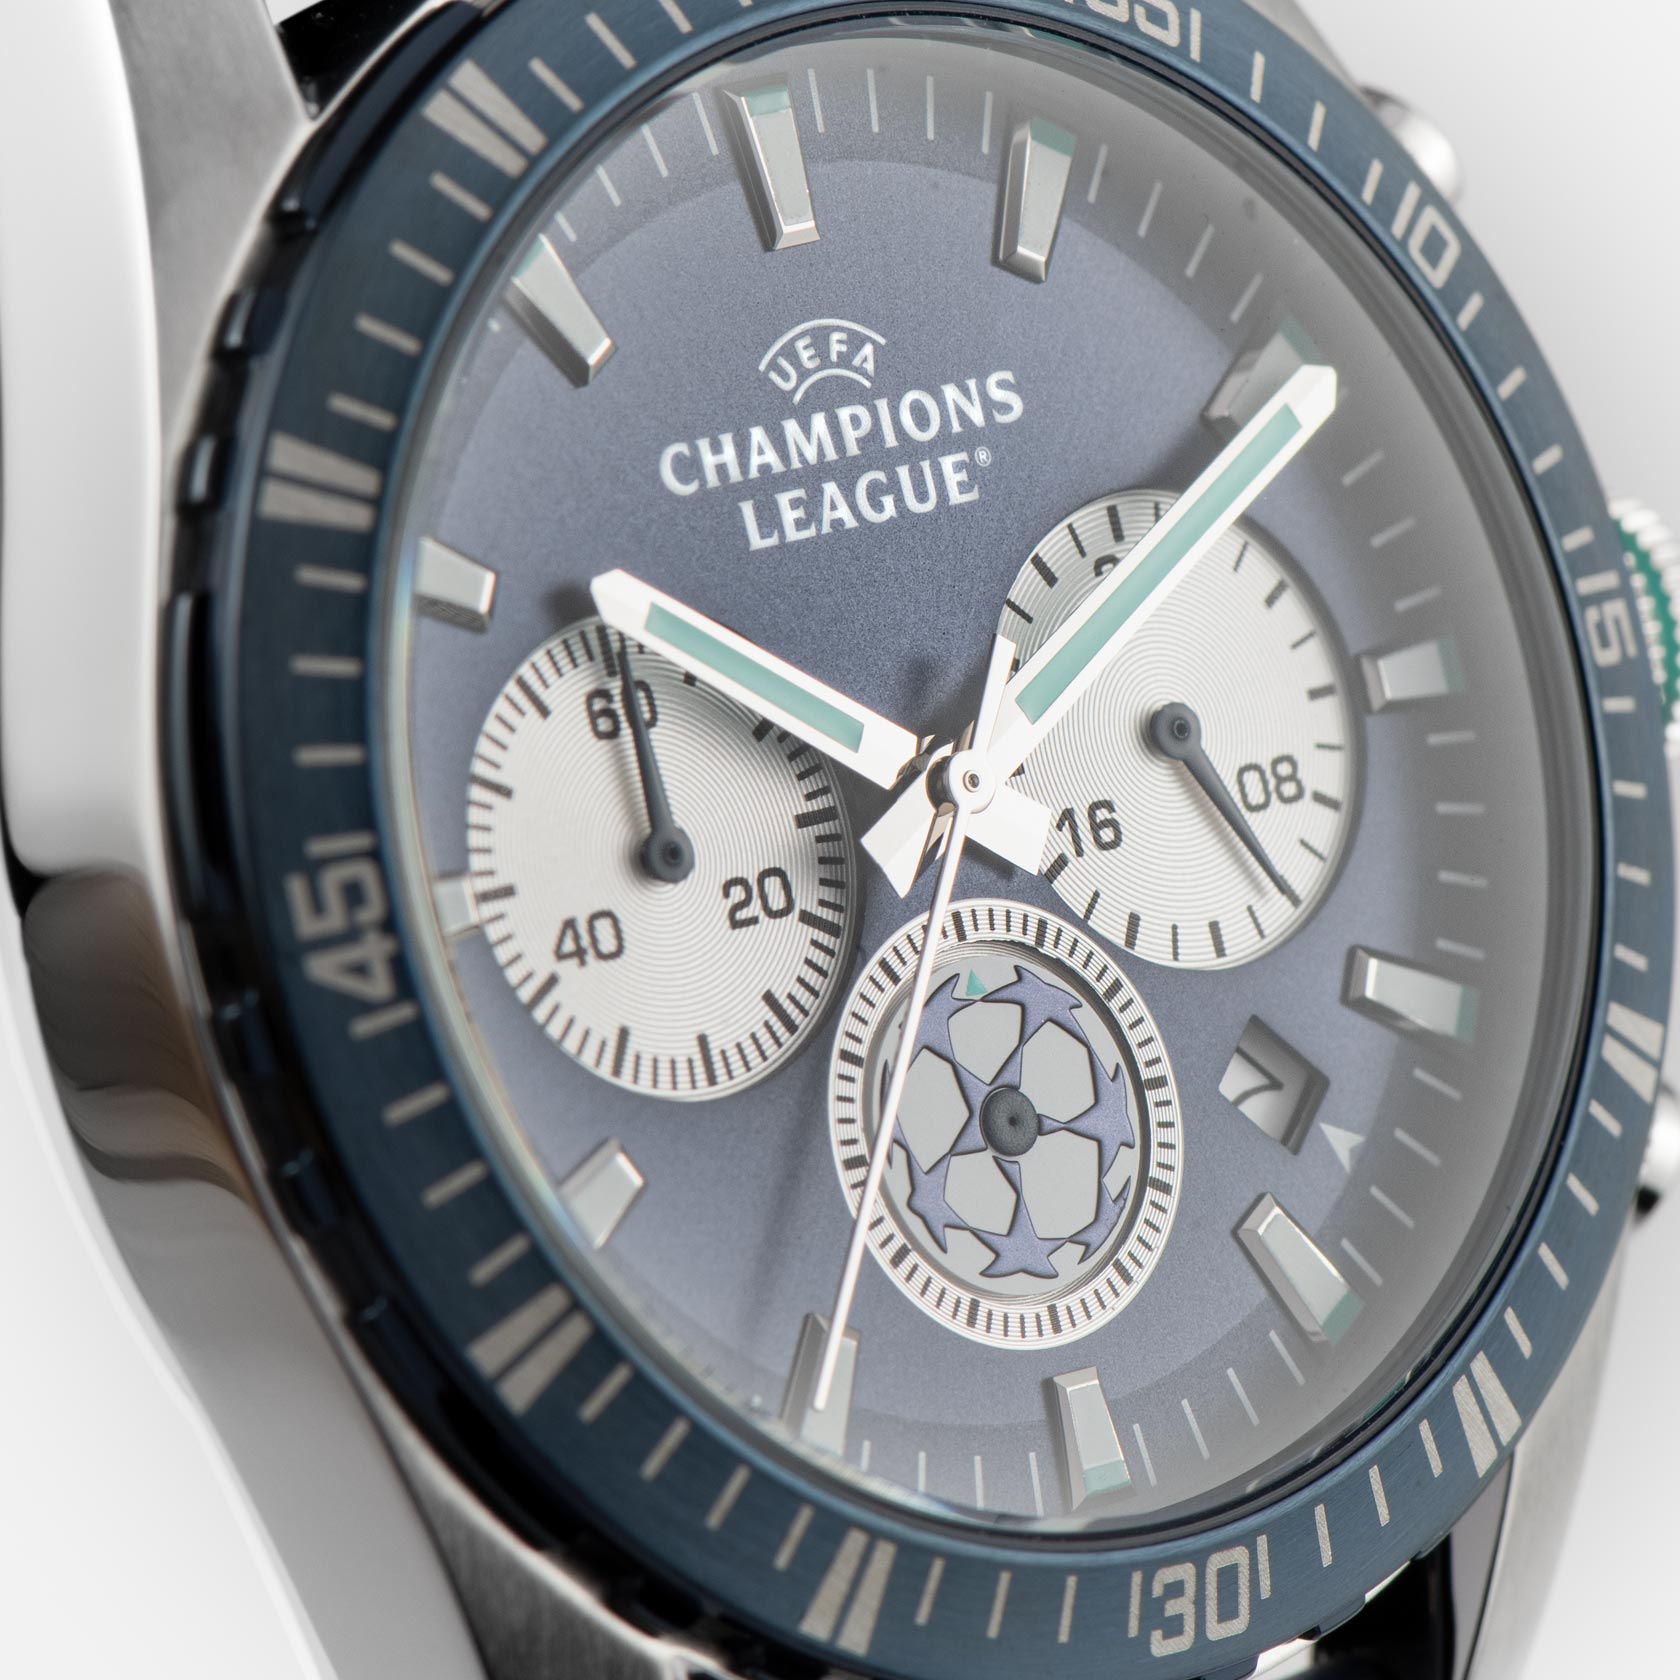 UCL Chronograph CL-102B Jacques Lemans Watch UEFA Club Competitions Online Store